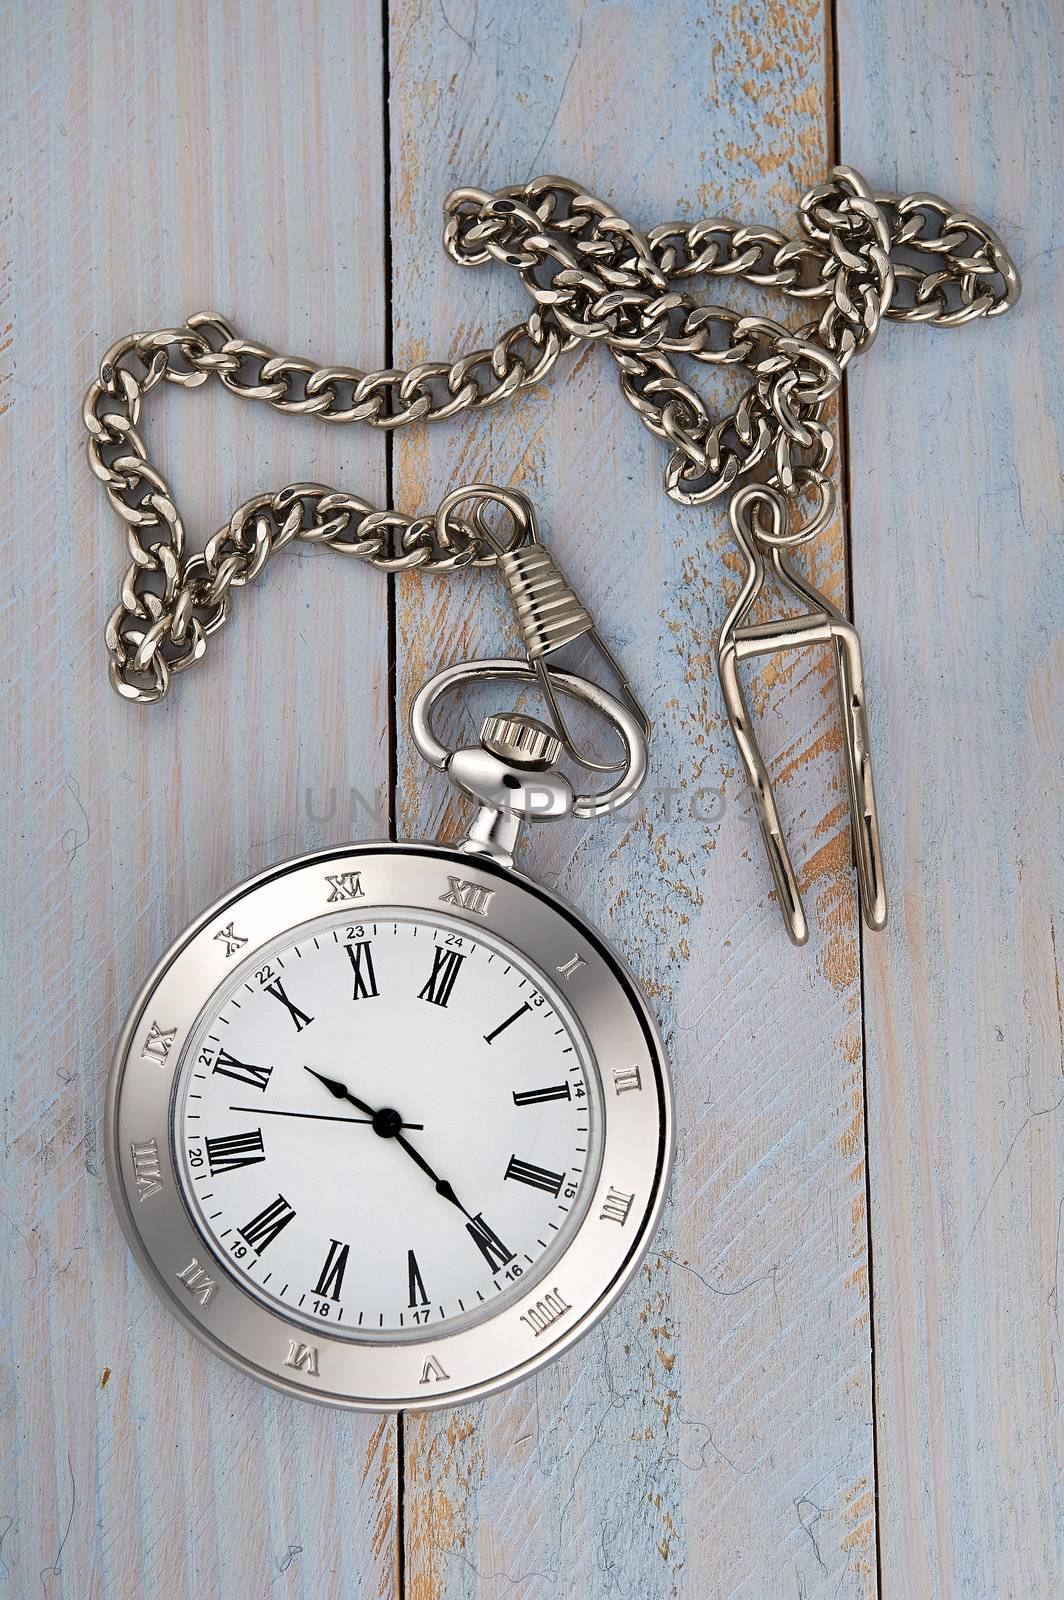 Vintage pocket watch with chain on table by kirs-ua